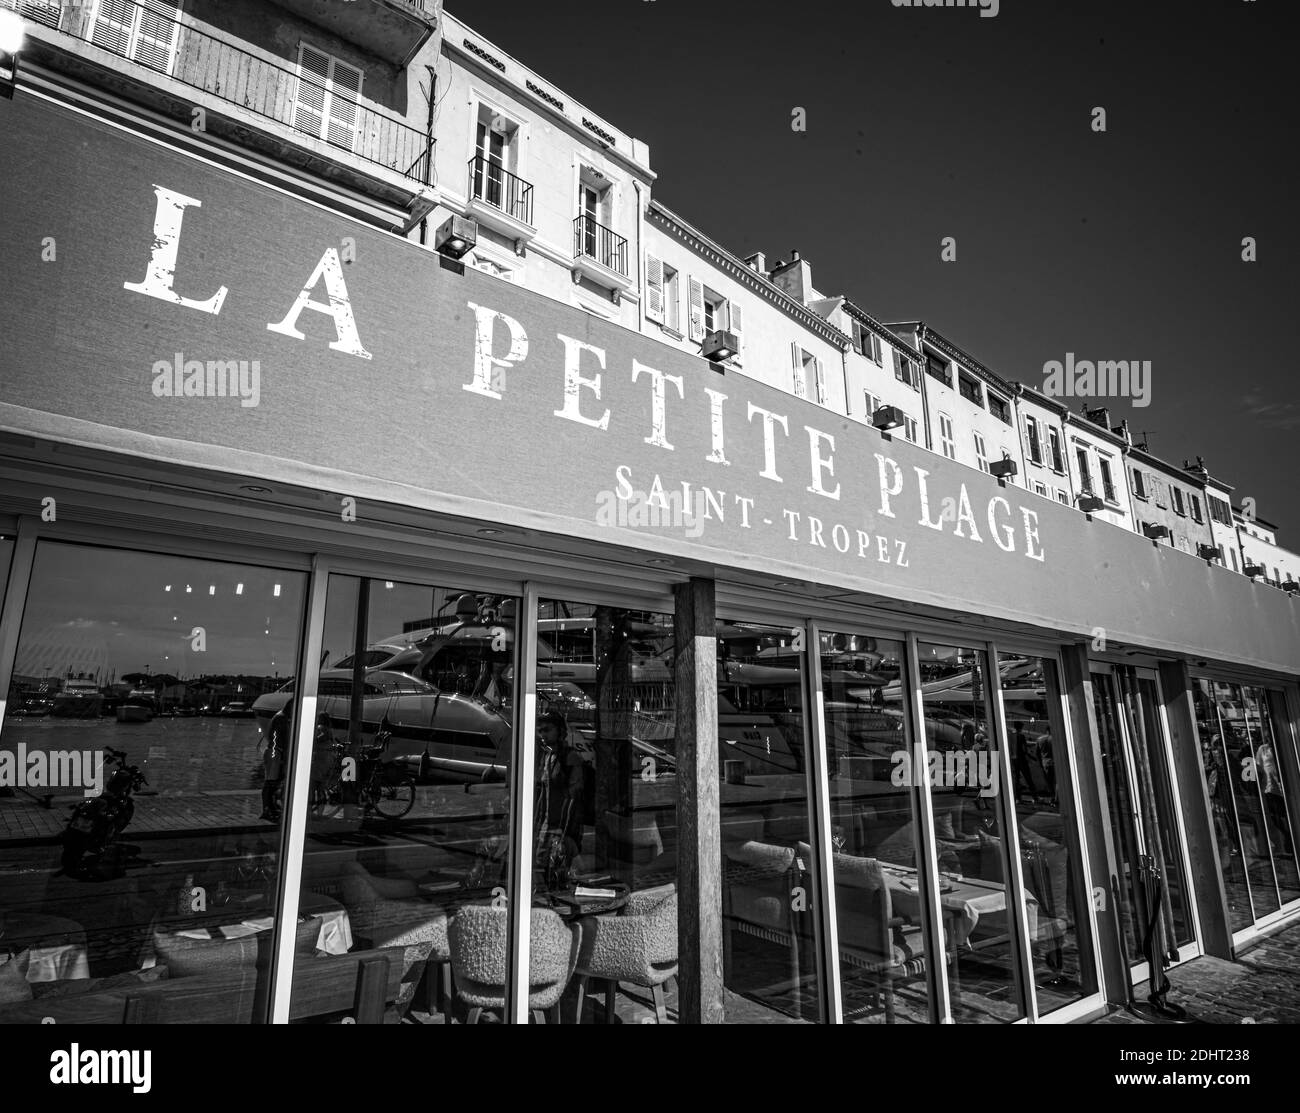 Saint tropez port with boats Black and White Stock Photos & Images - Alamy